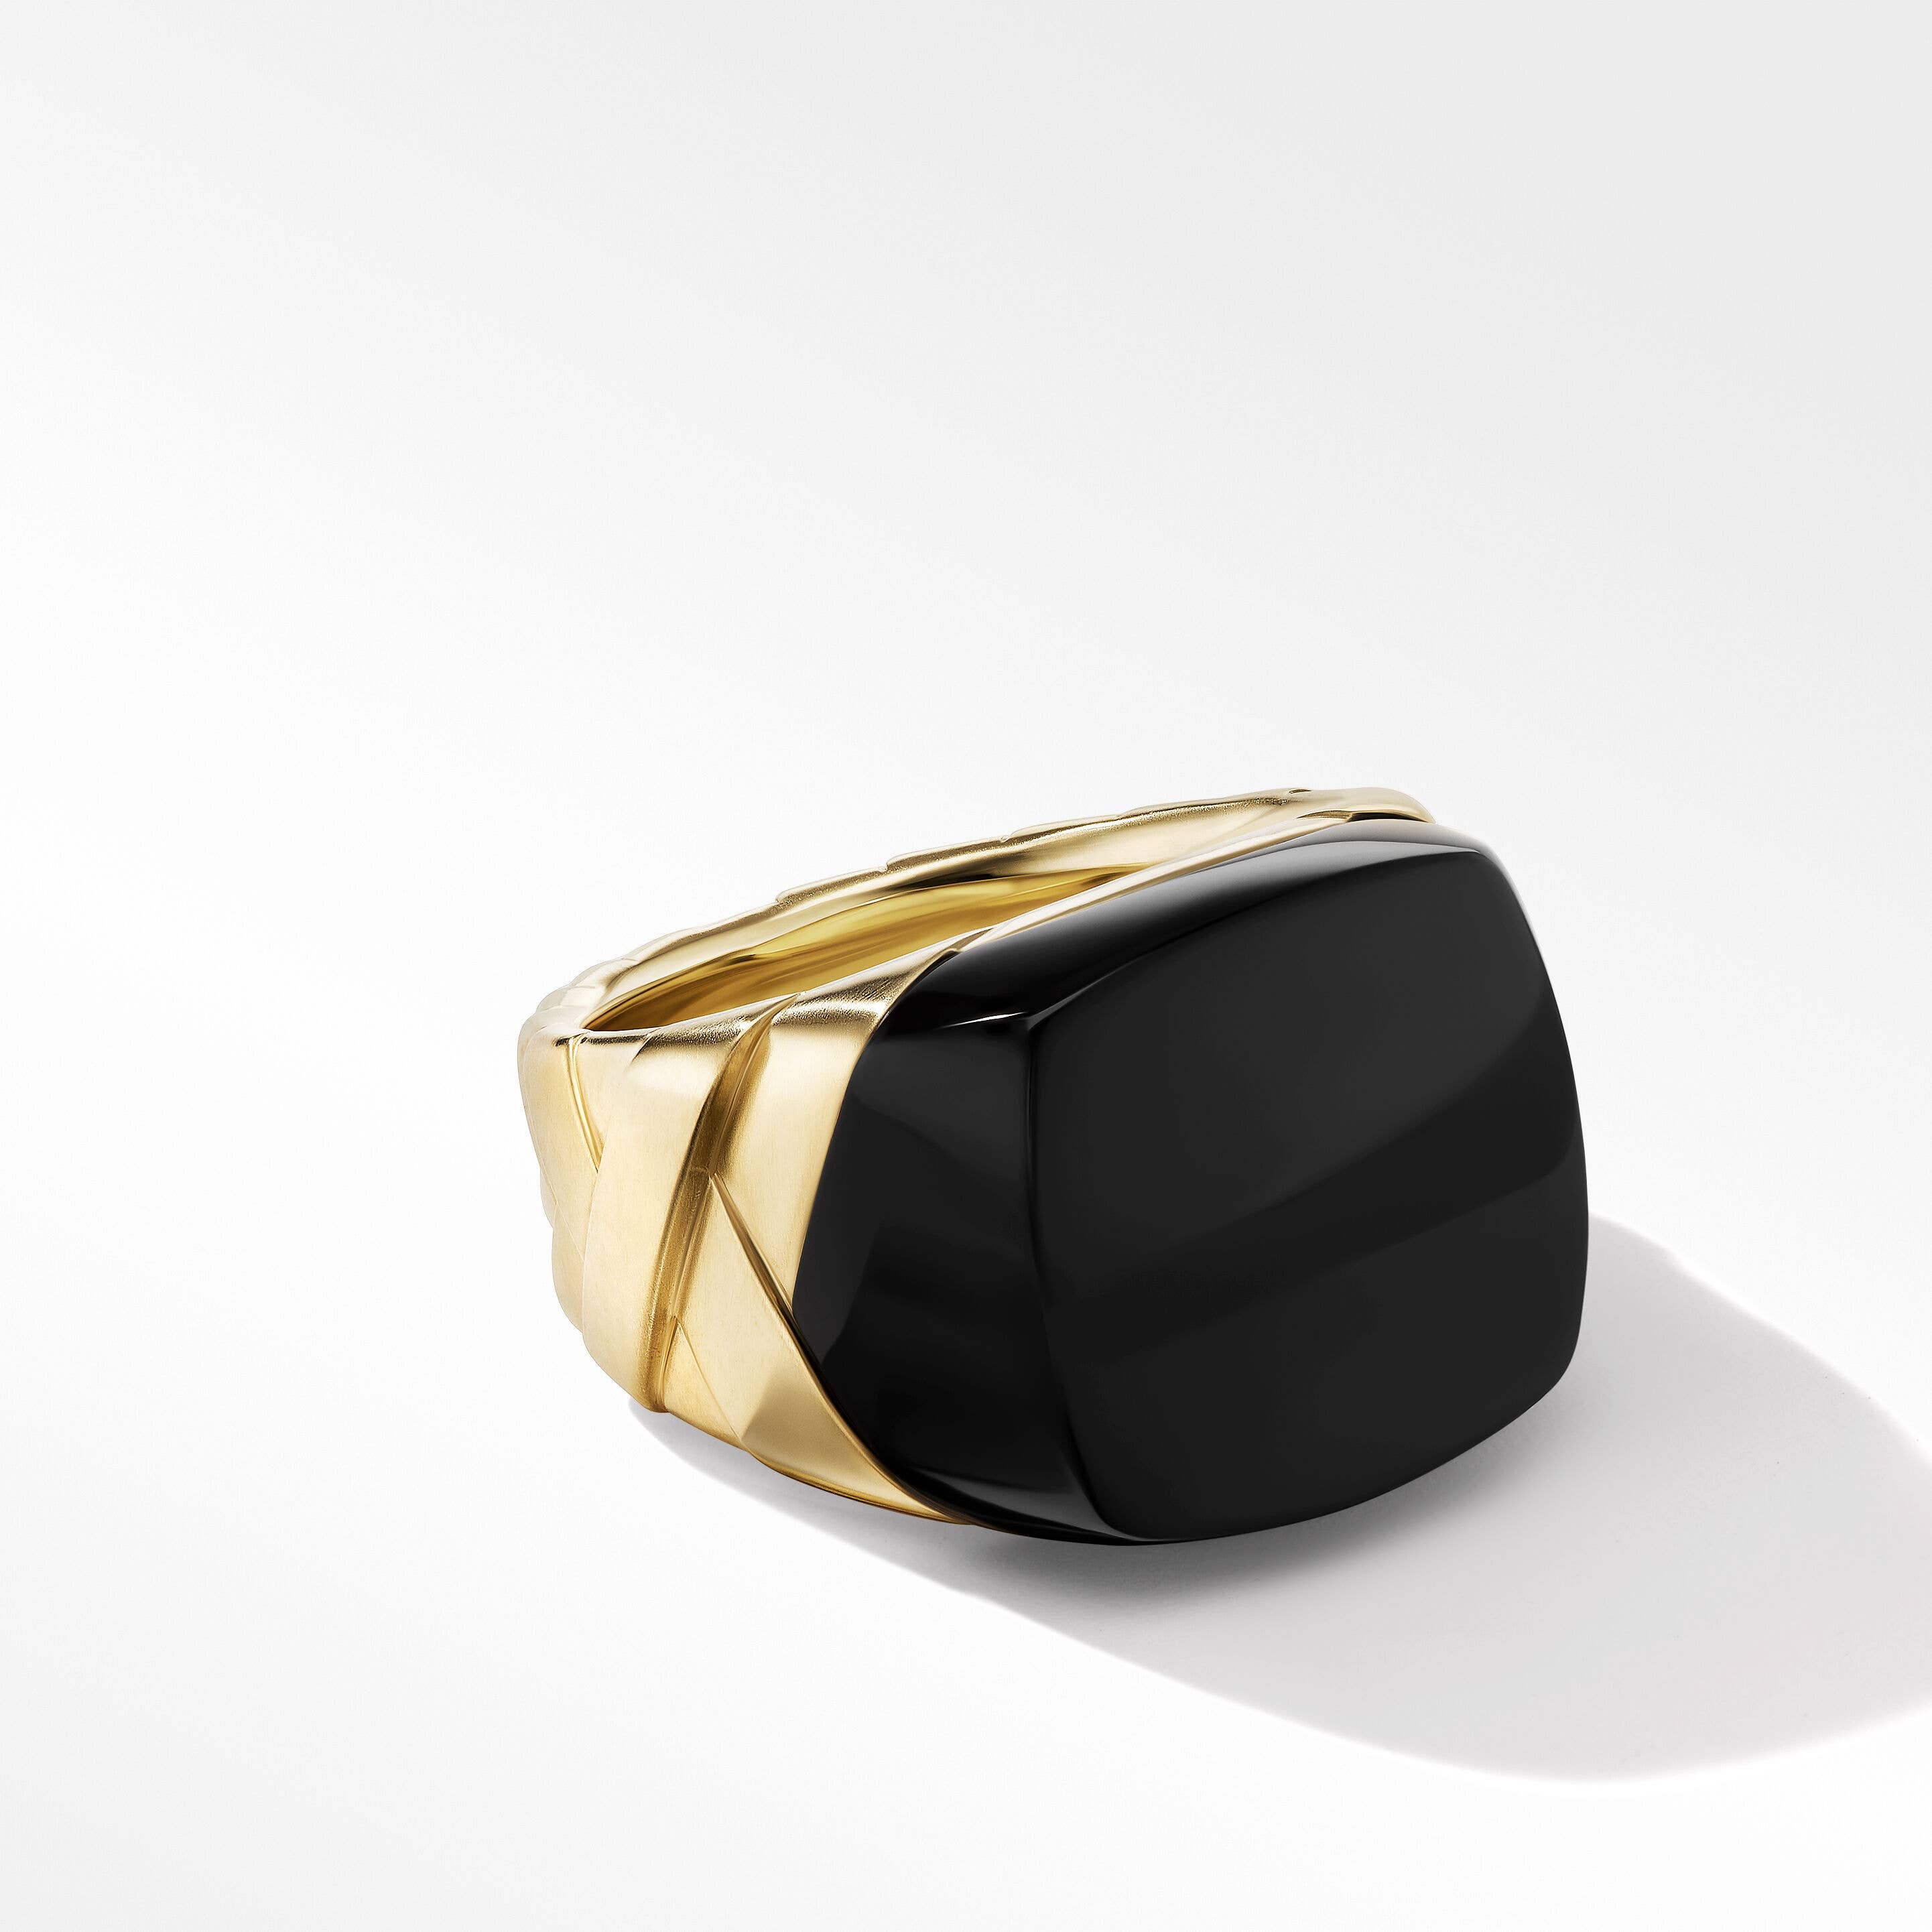 Cairo Mummy Wrap Signet Ring in 18K Yellow Gold with Black Onyx